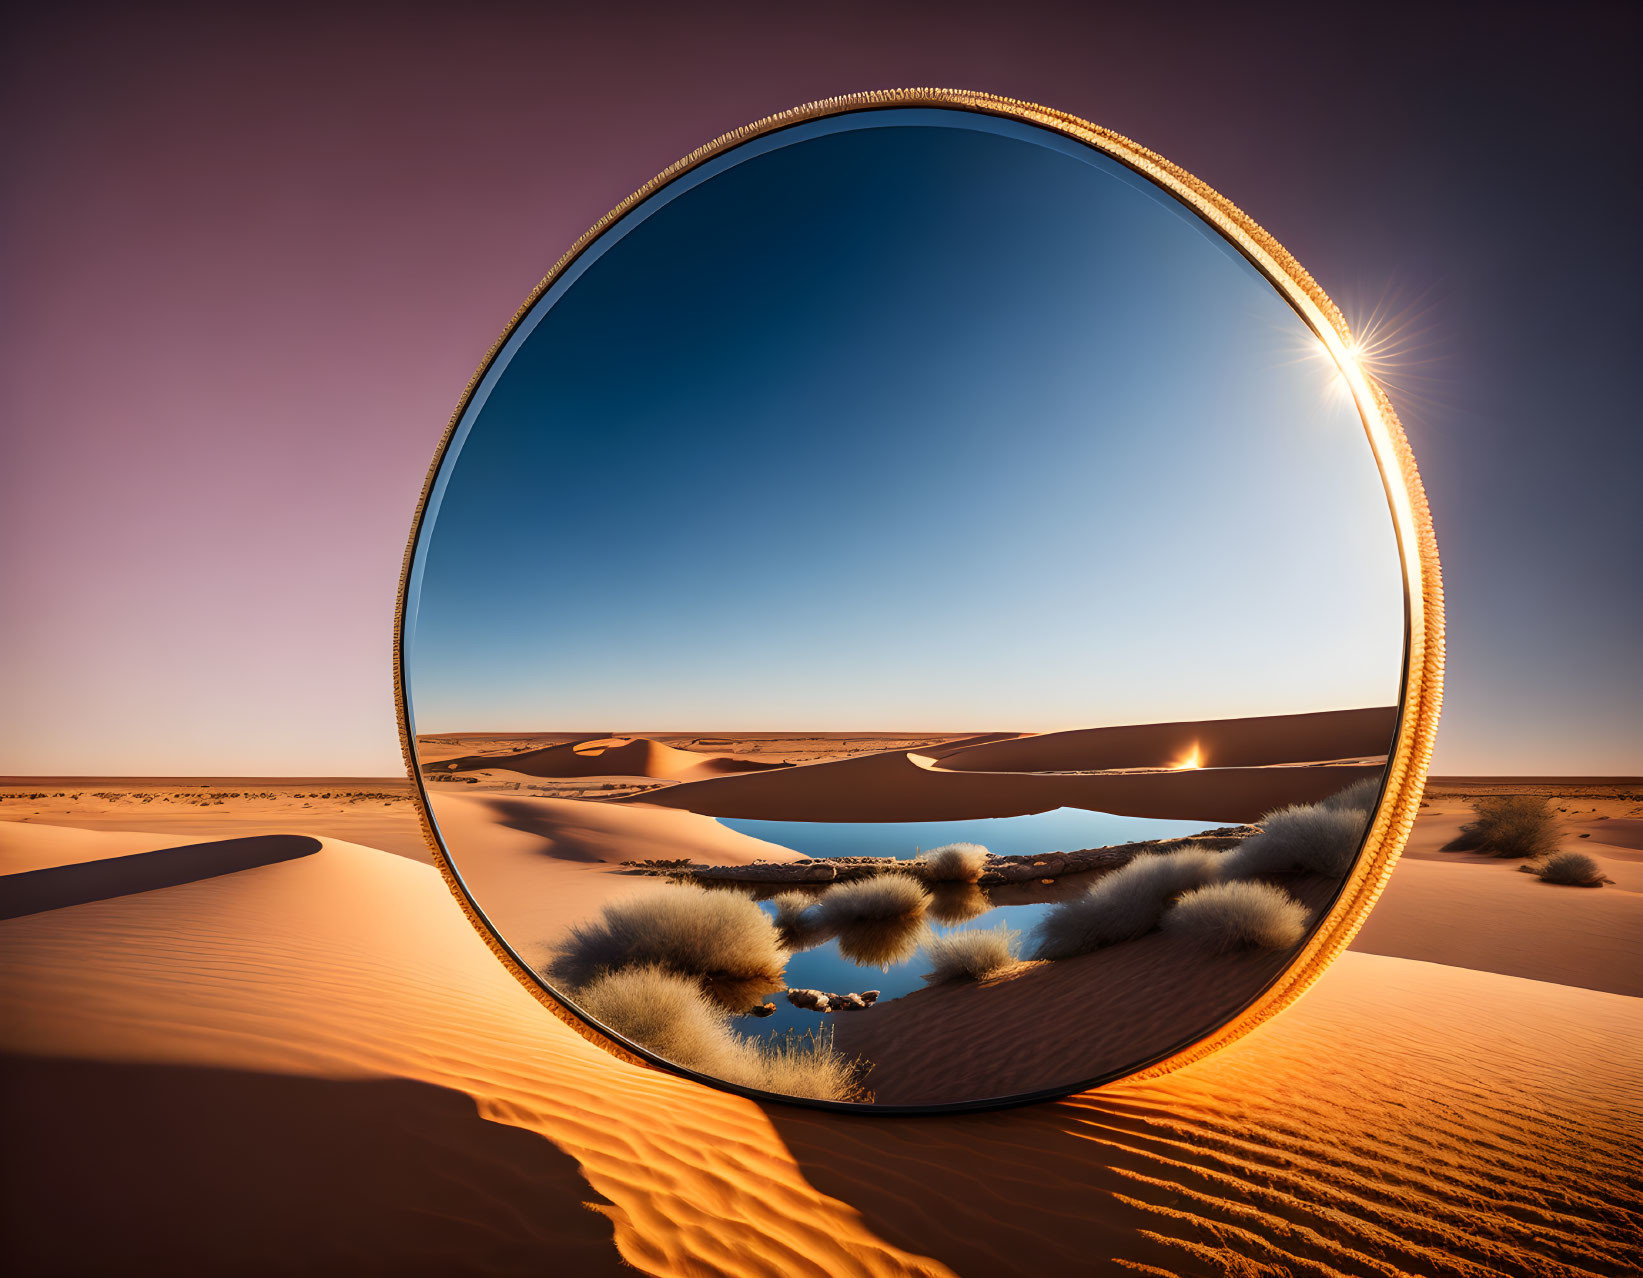 Circular desert mirror reflecting dunes and blue sky with sun flare